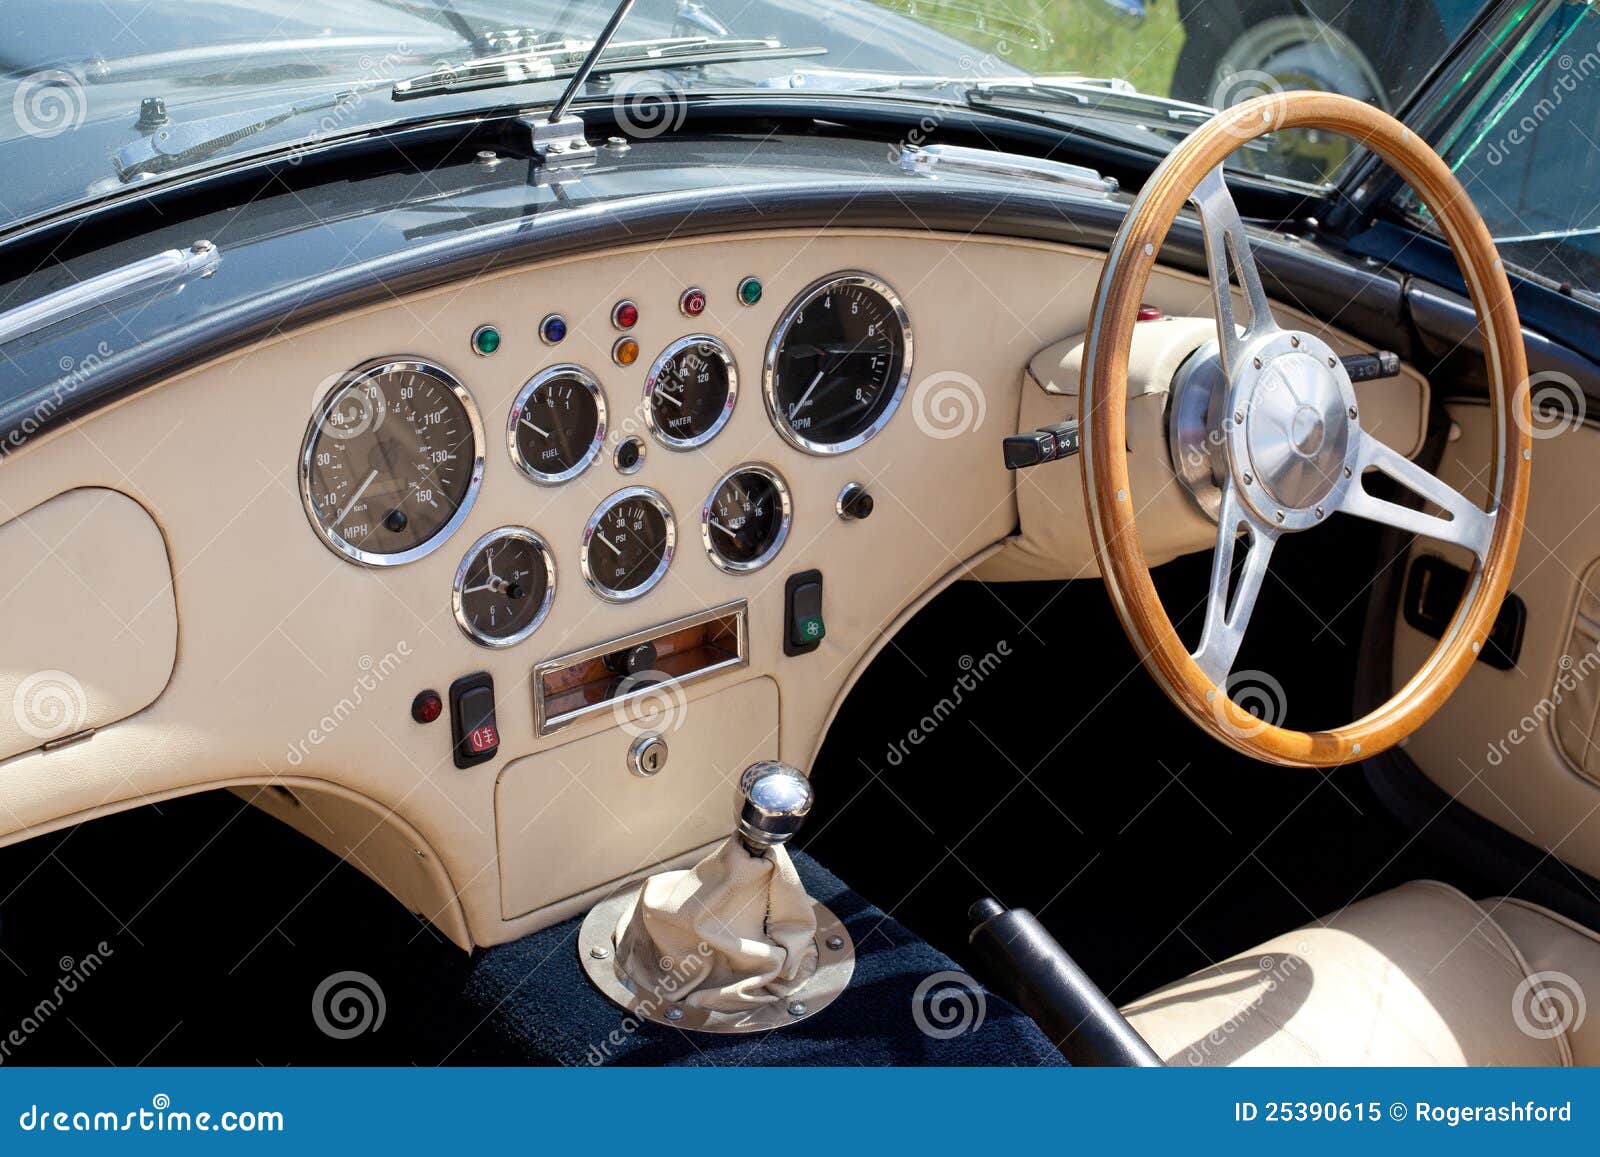 Classic Sports Car Dashboard Royalty Free Stock Photo  Image 